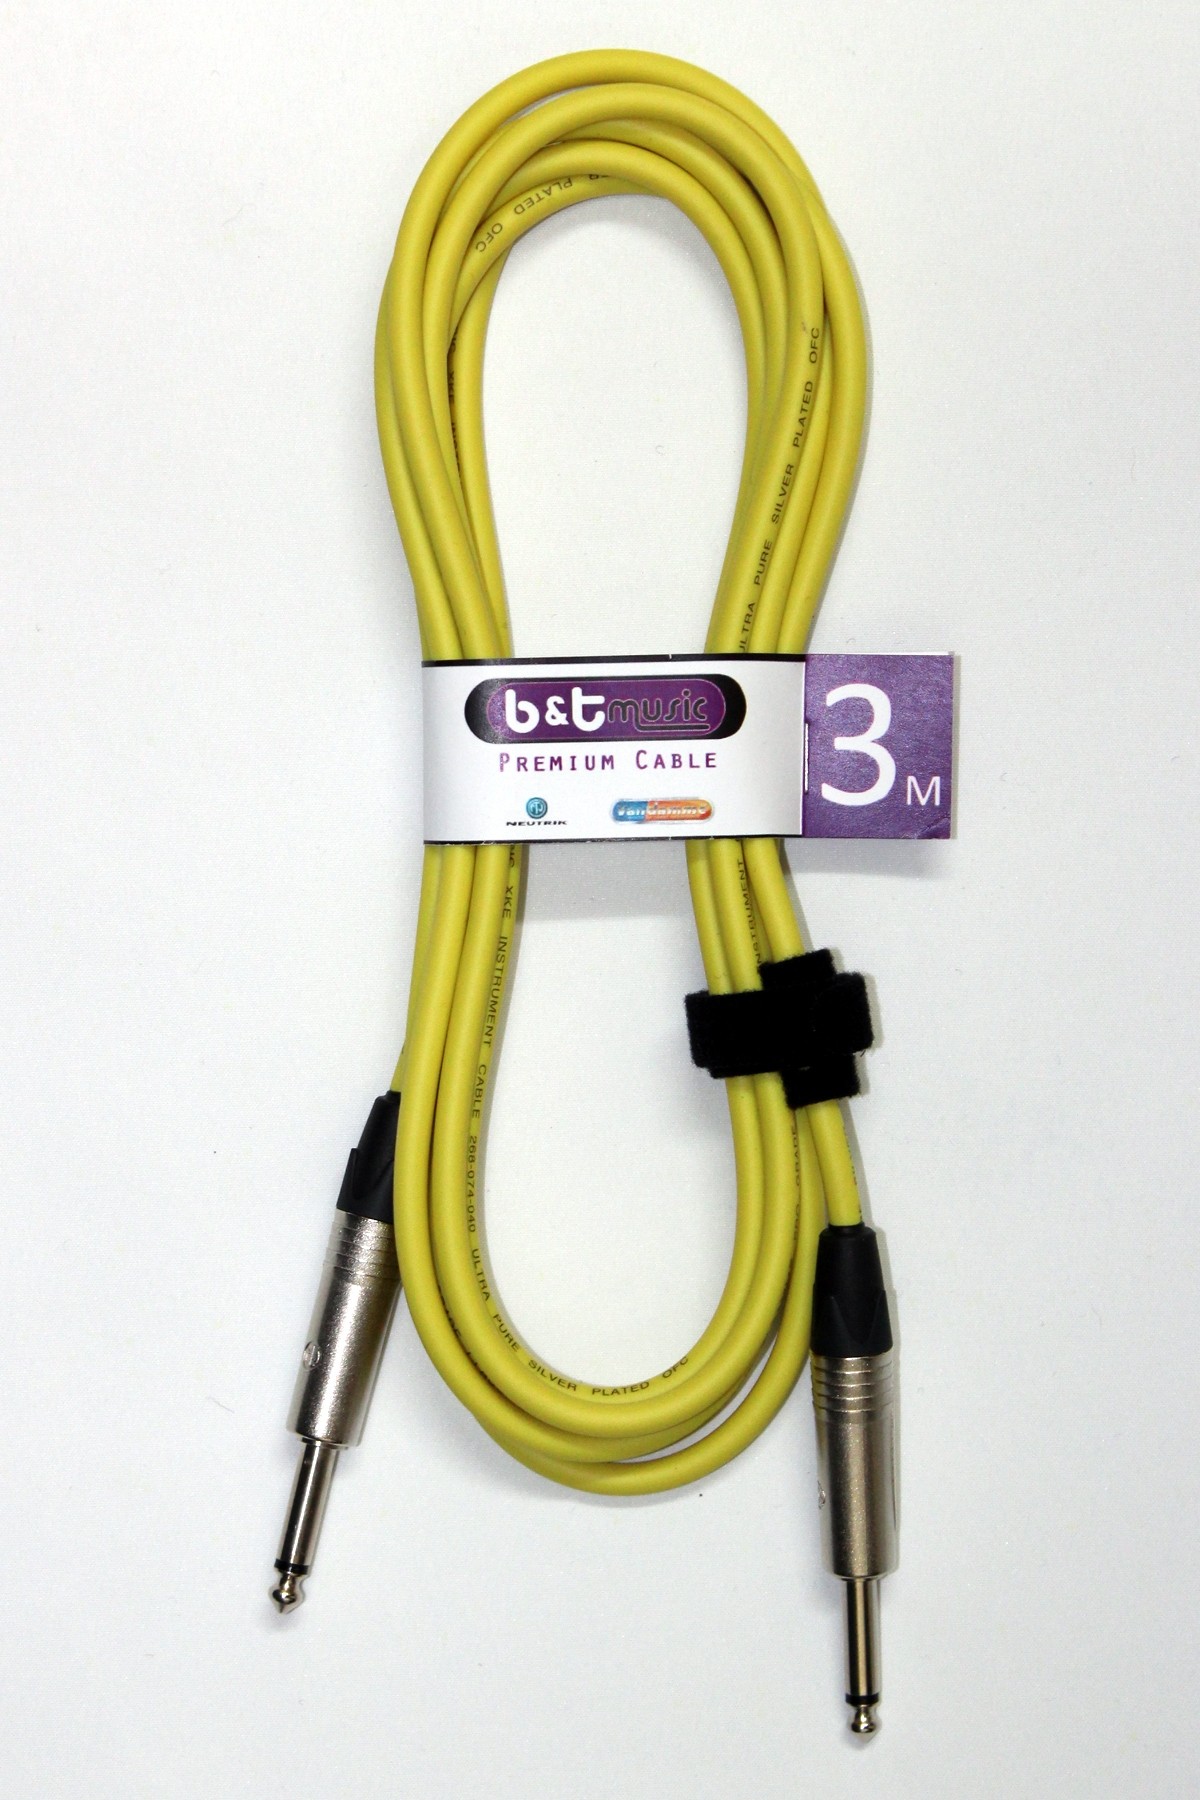 B&T Music Premium Cable 3m Jack To Jack - Yellow